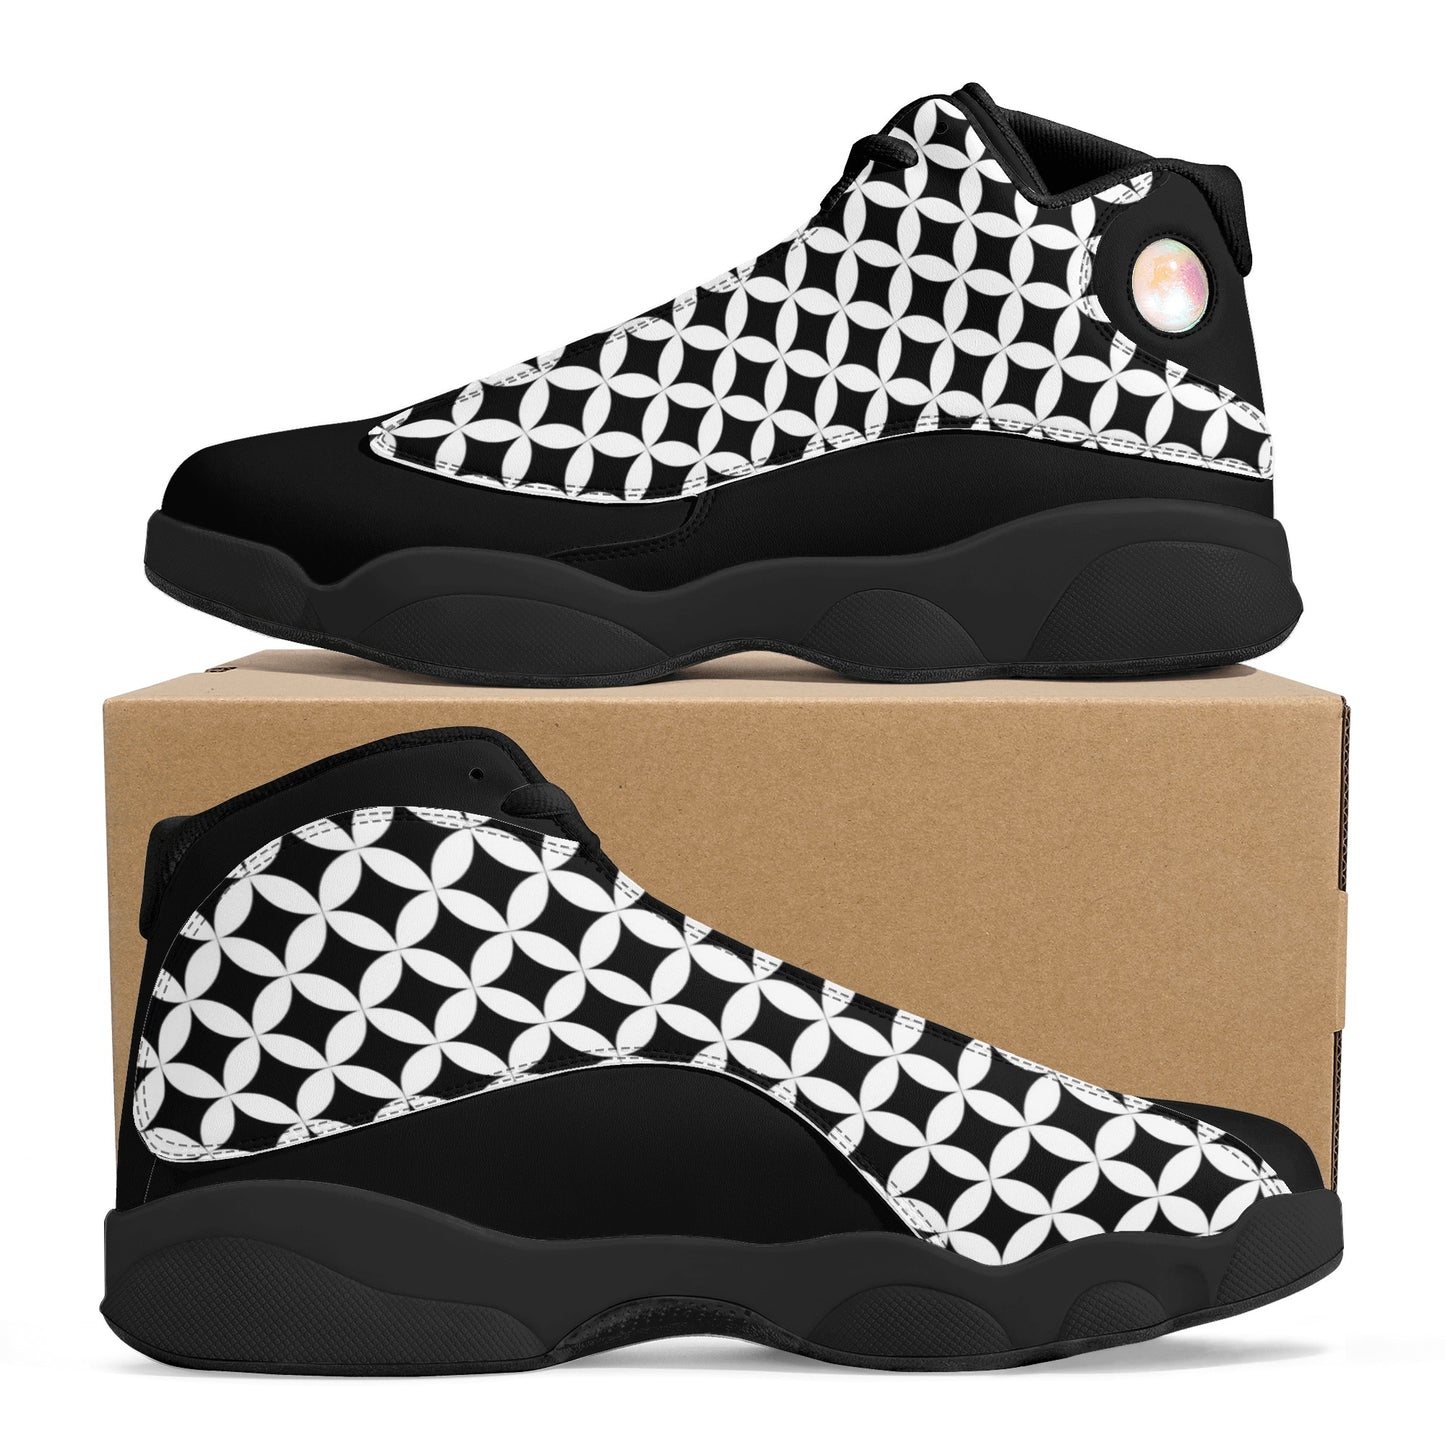 Rongoworks Archidamus Vegan Leather Basketball Shoes Rongoworks